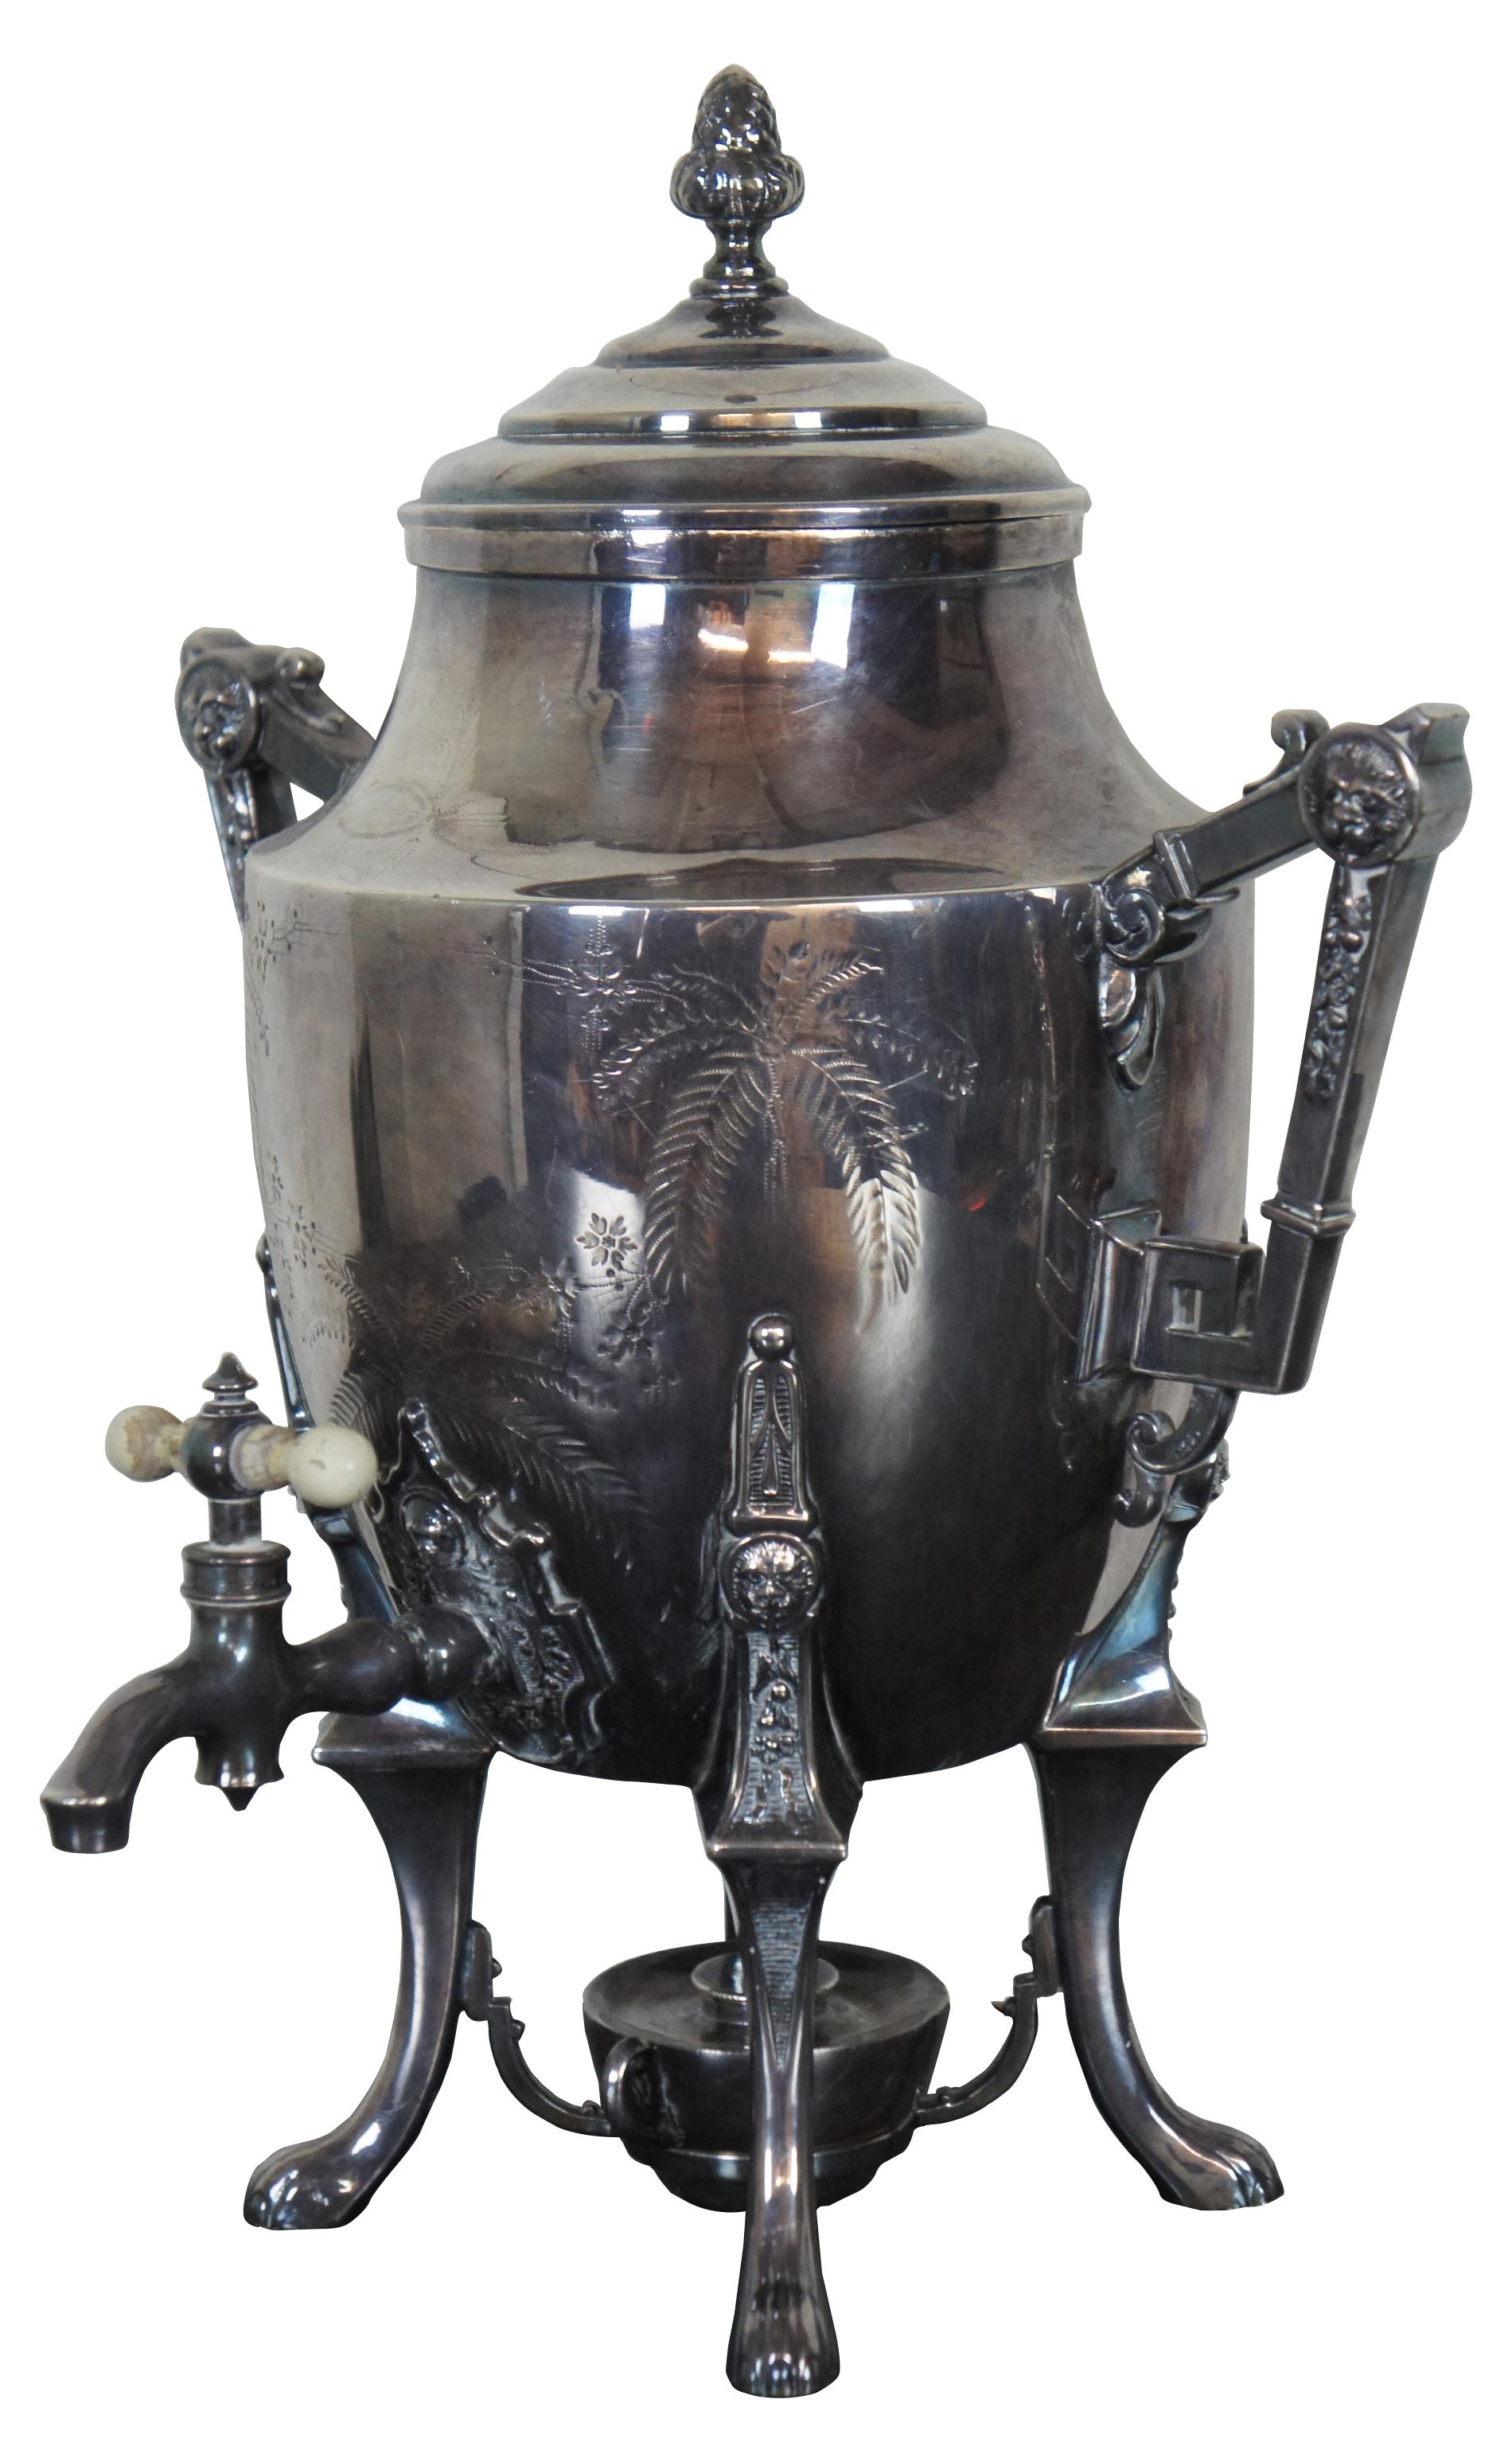 Antique silver plated coffee urn and burner by Rogers Smith & Co of New Haven, Connecticut. Decorated with engraved palm trees, floral and lions head accents and acorn finial. Measure: 16